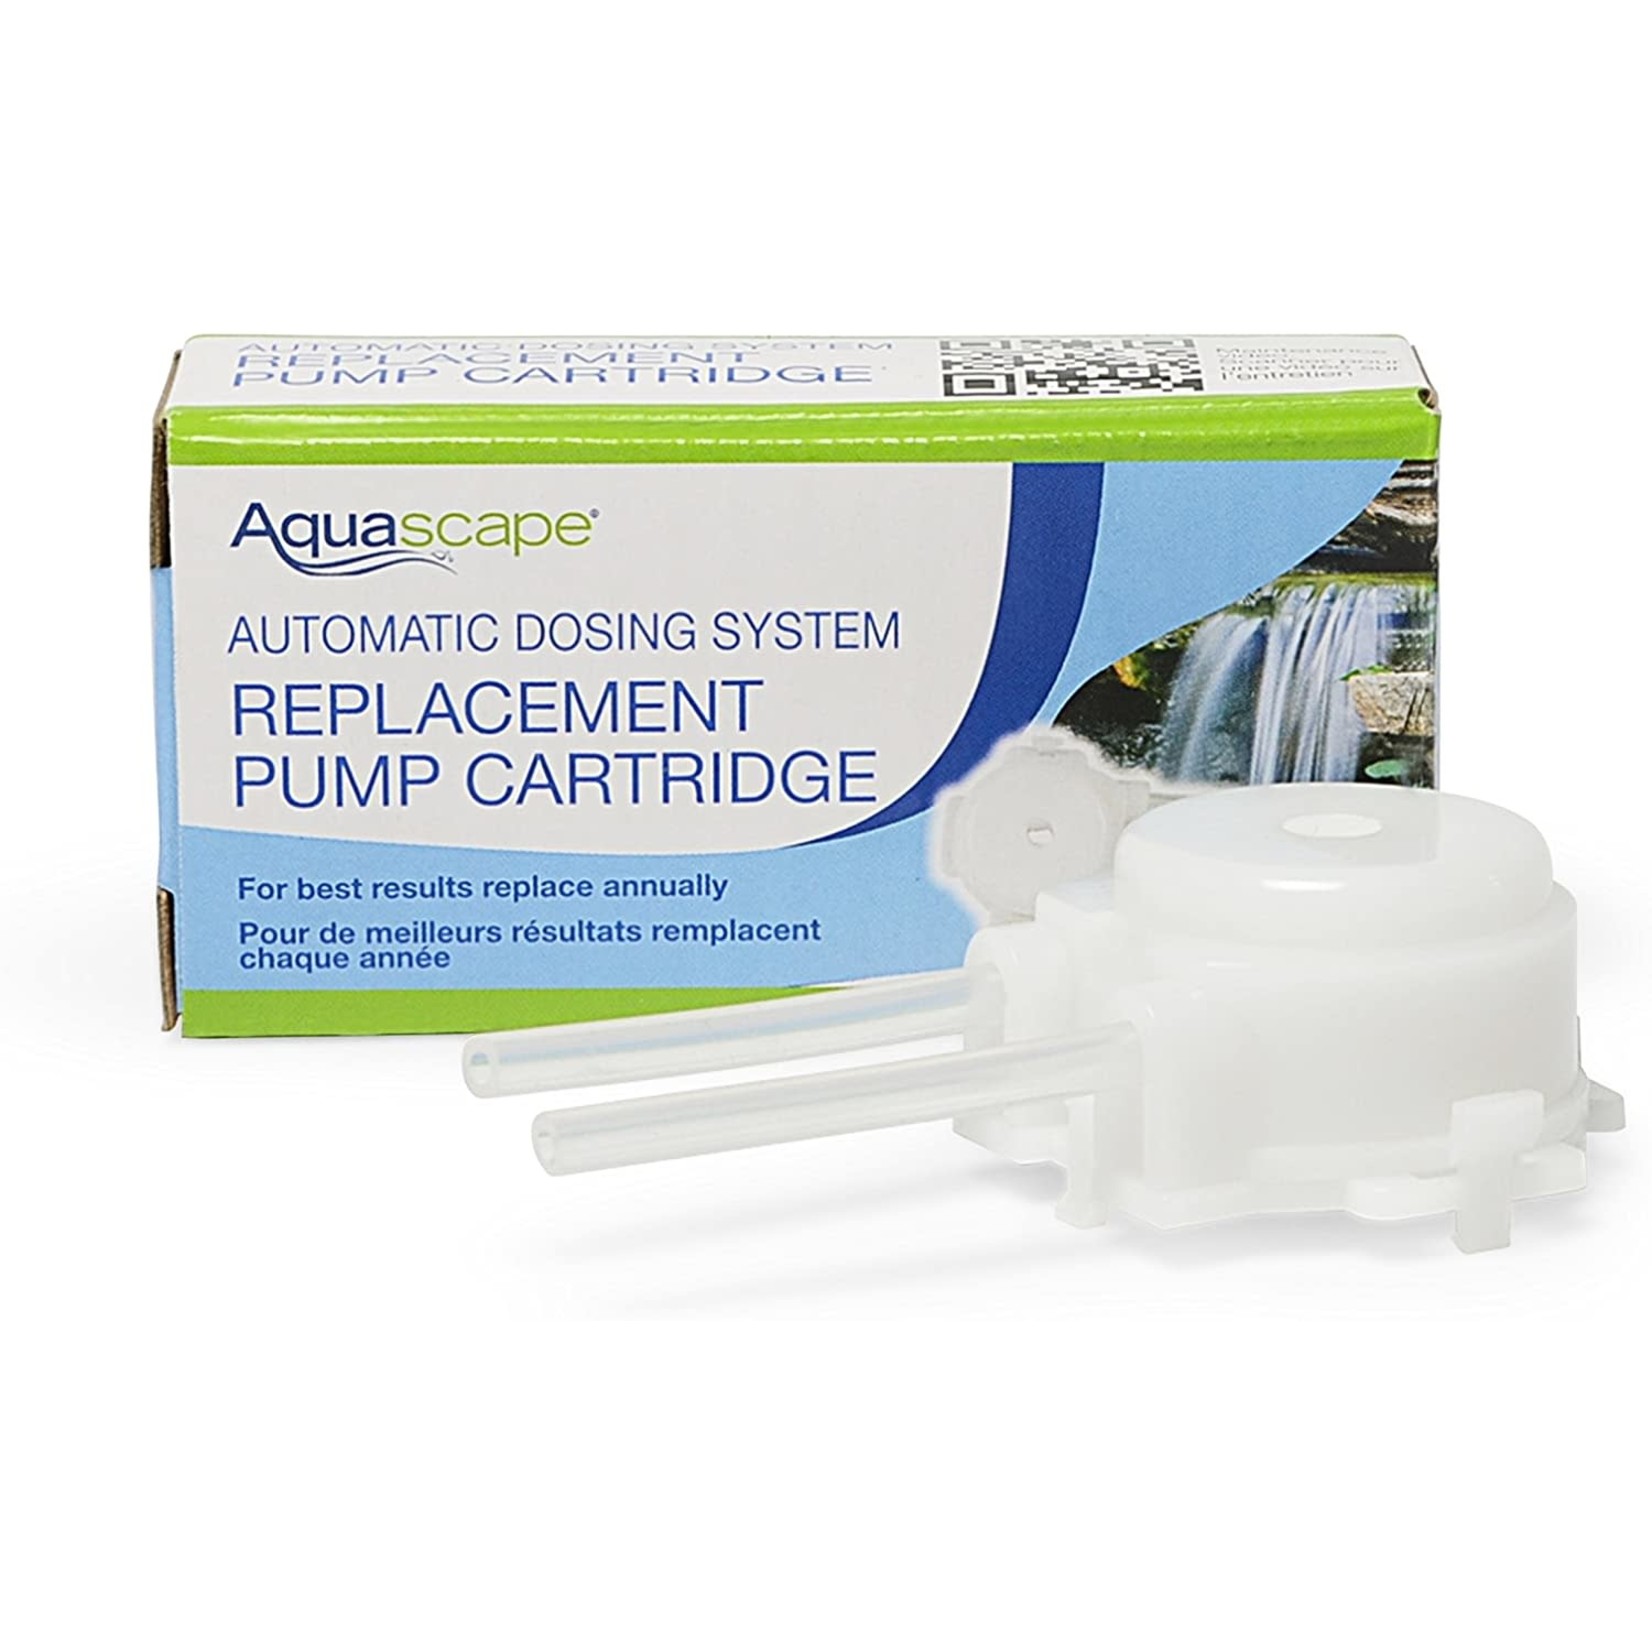 Aquascape Automatic Water Treatment Dosing System Replacement Pump Cartridge